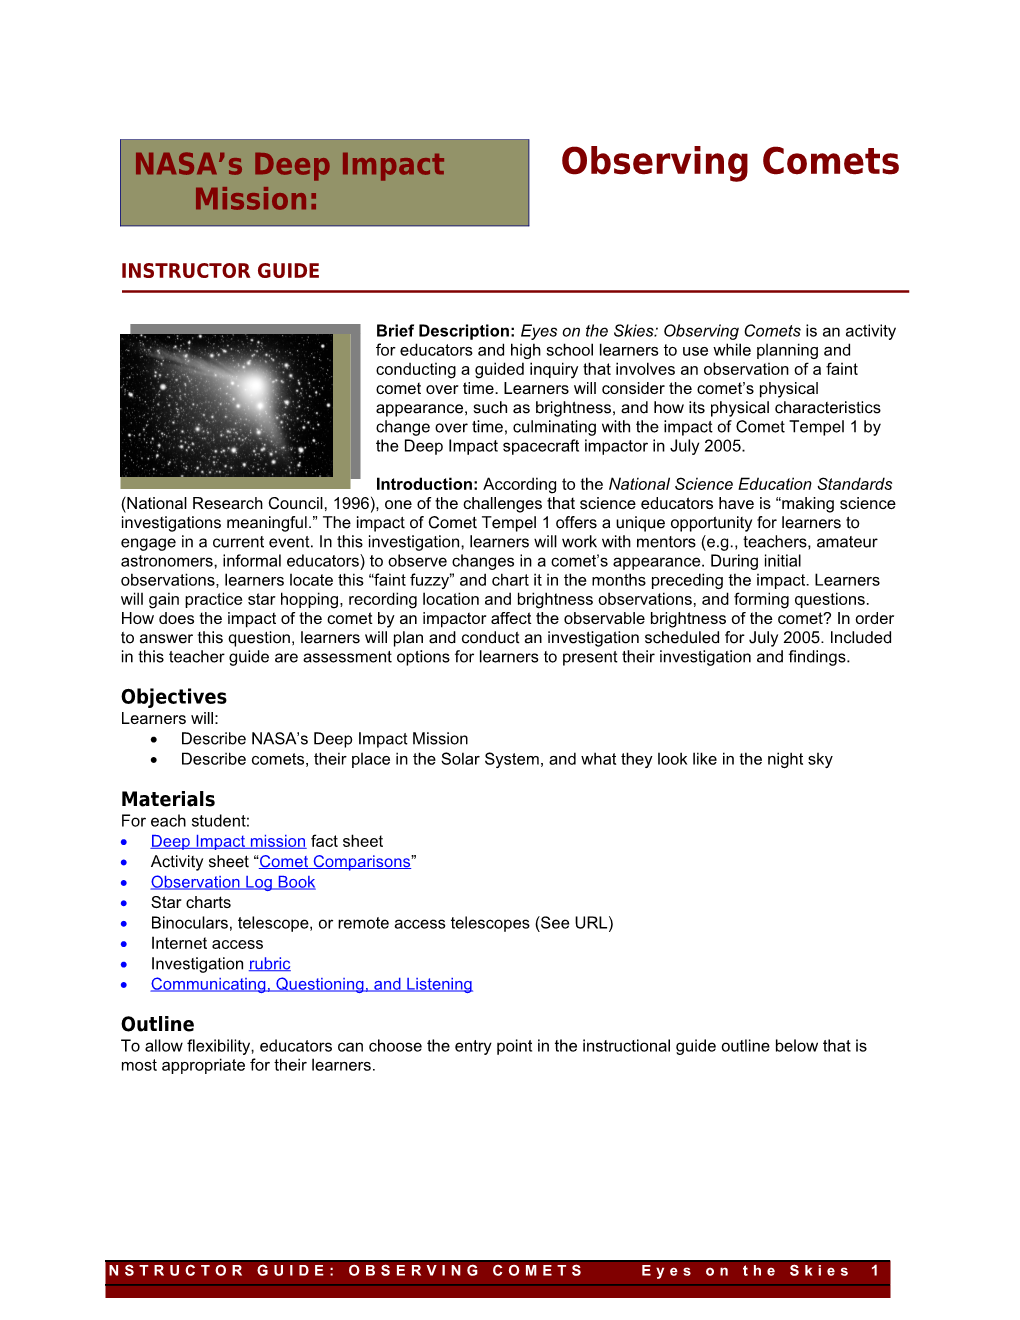 Eyes on the Sky: Observing Comet Tempel 1 and Deep Impact